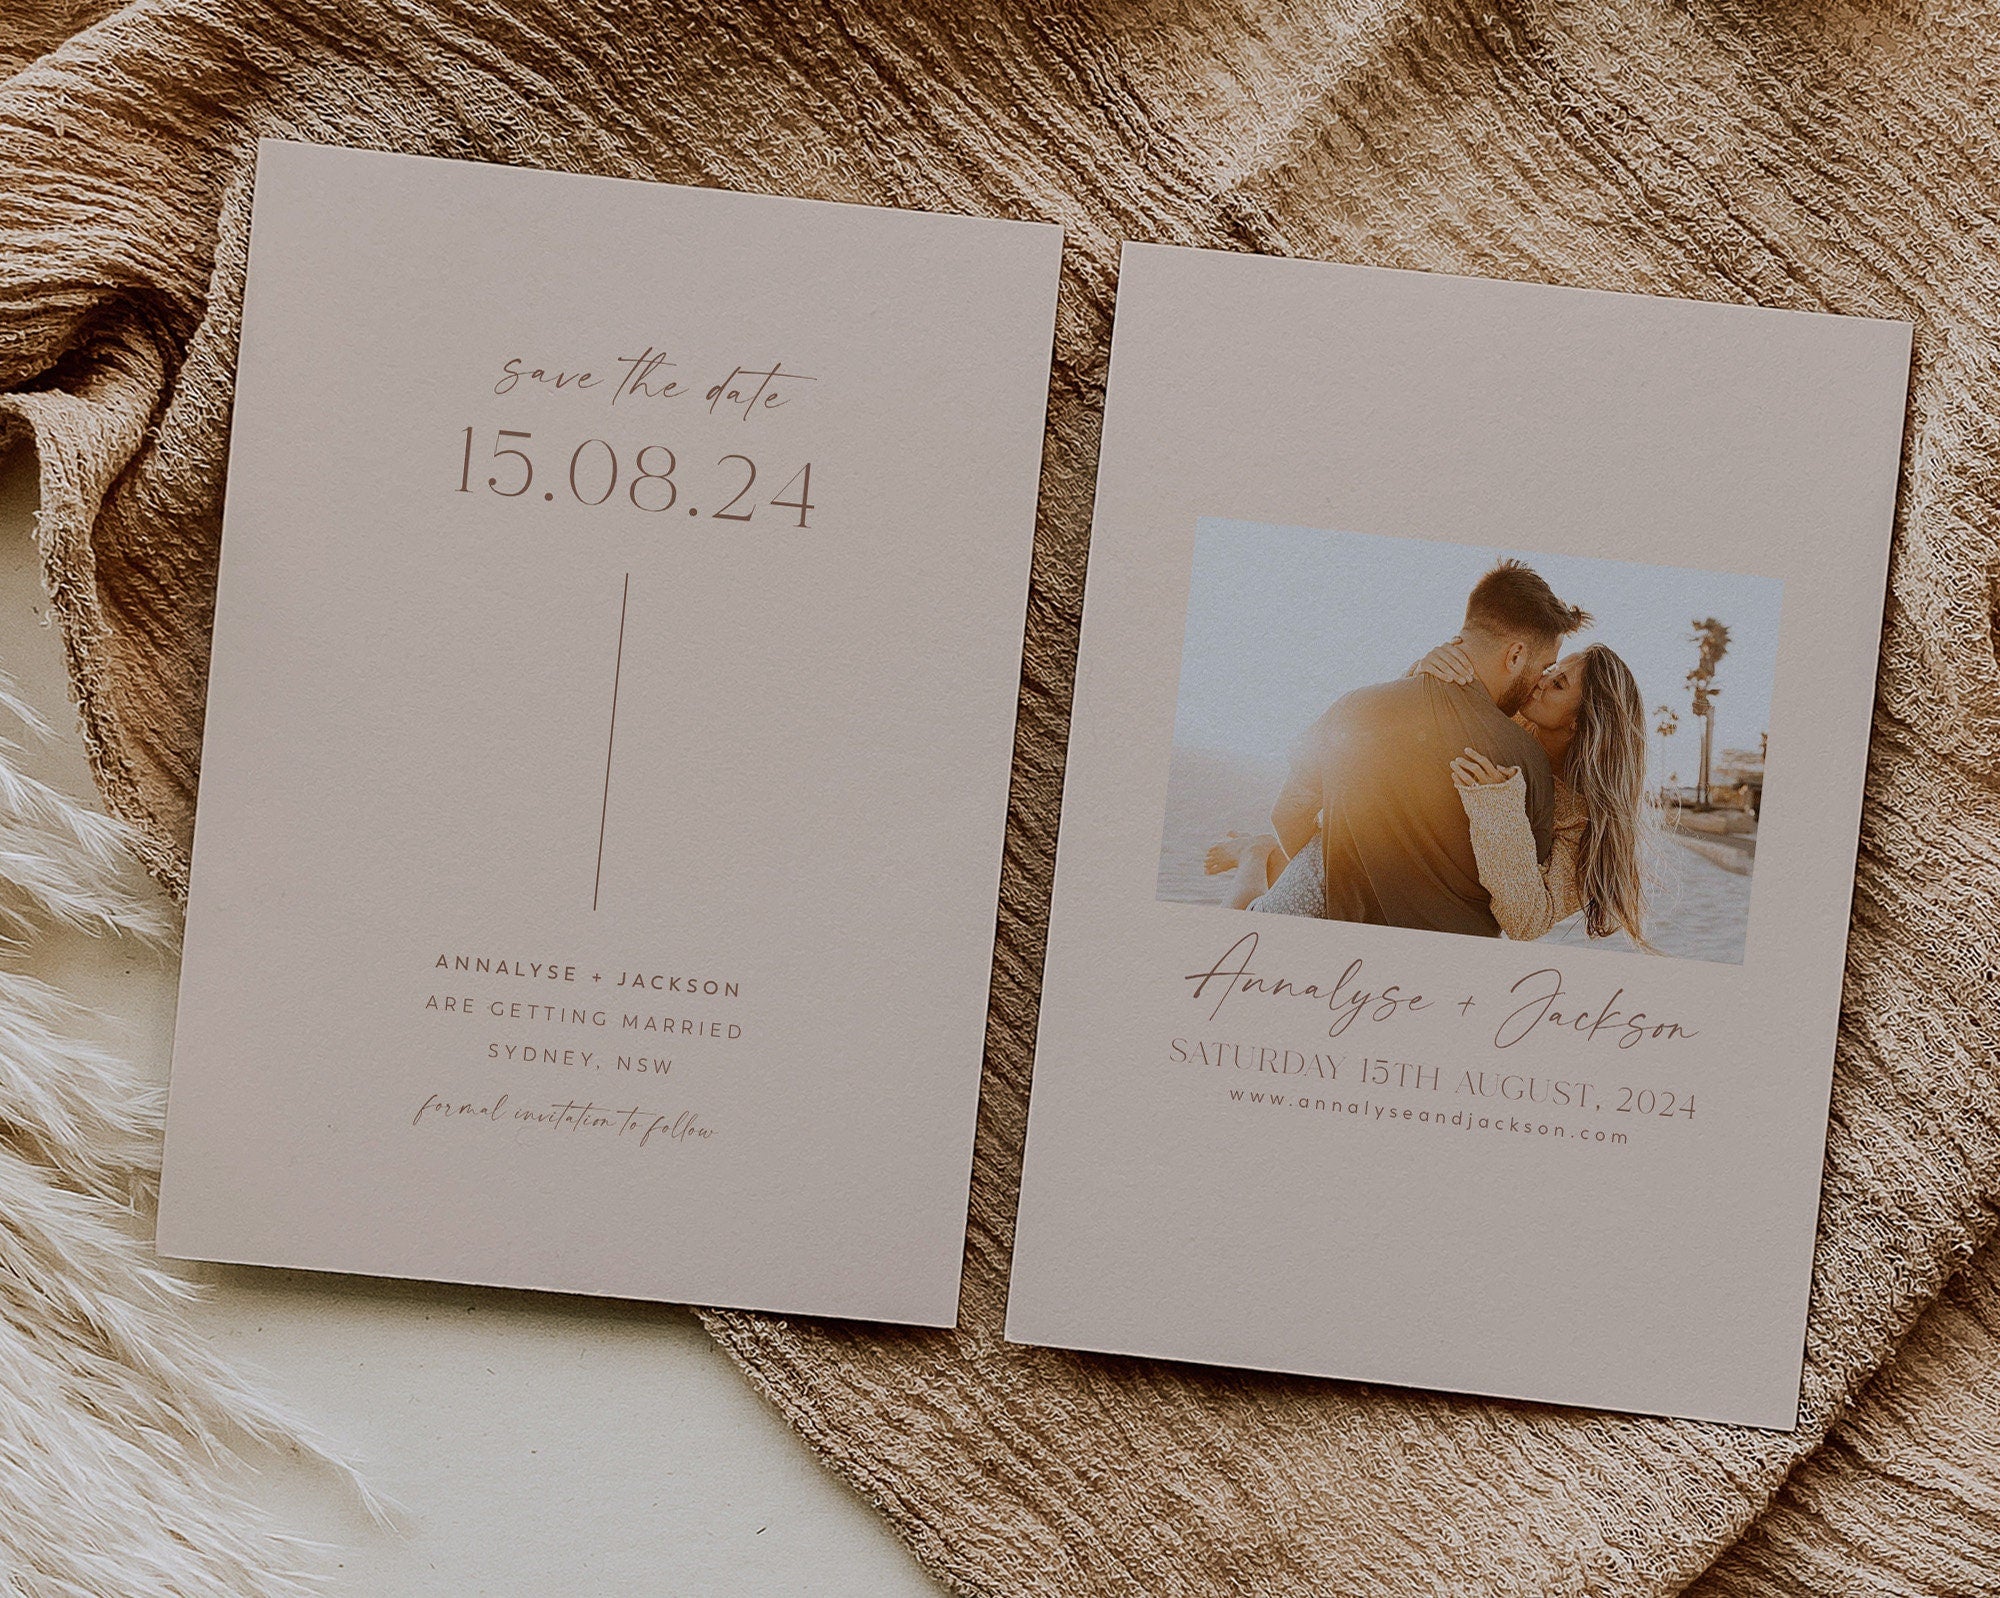 Save the Date Template, Photo Save the Date, Editable Save Our Date, Minimalist Save The Date Card, Rustic Wedding Invitation, Annalyse